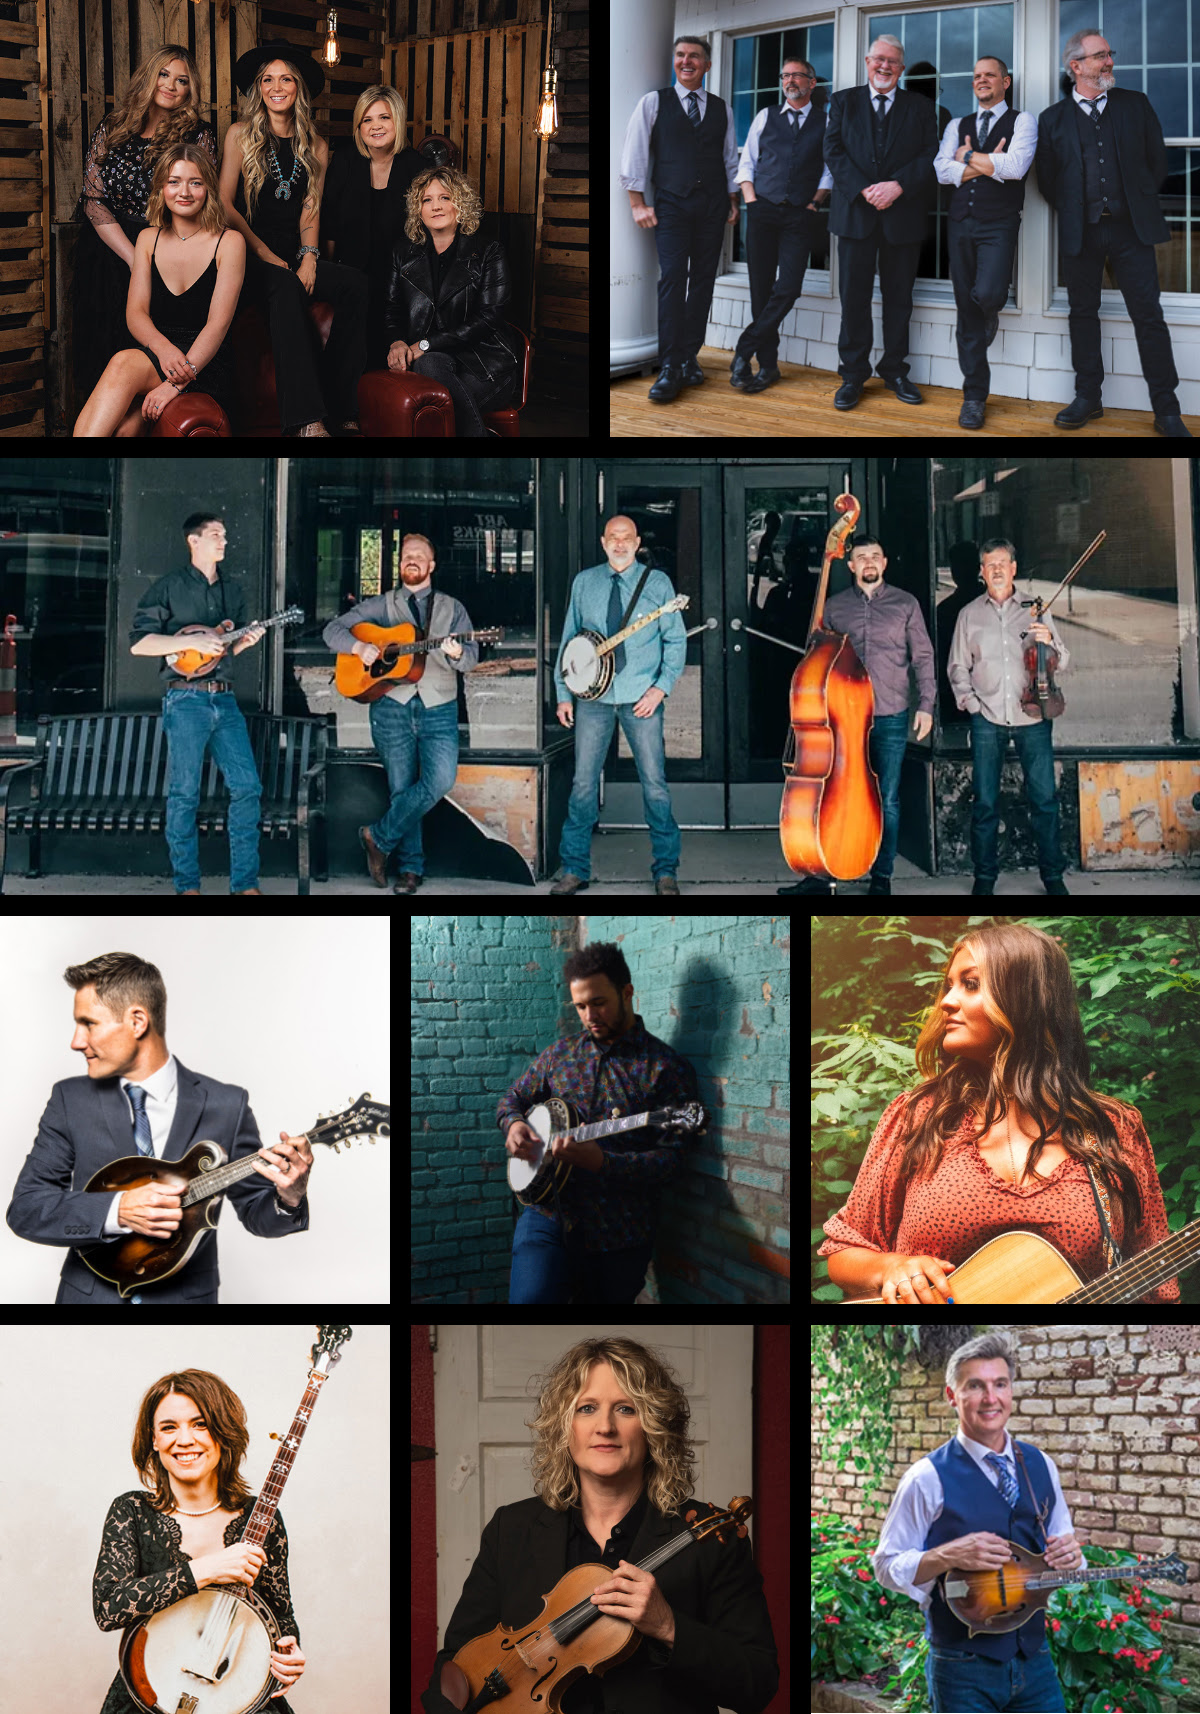 Mountain Home Music Company celebrates this year's IBMA nominees